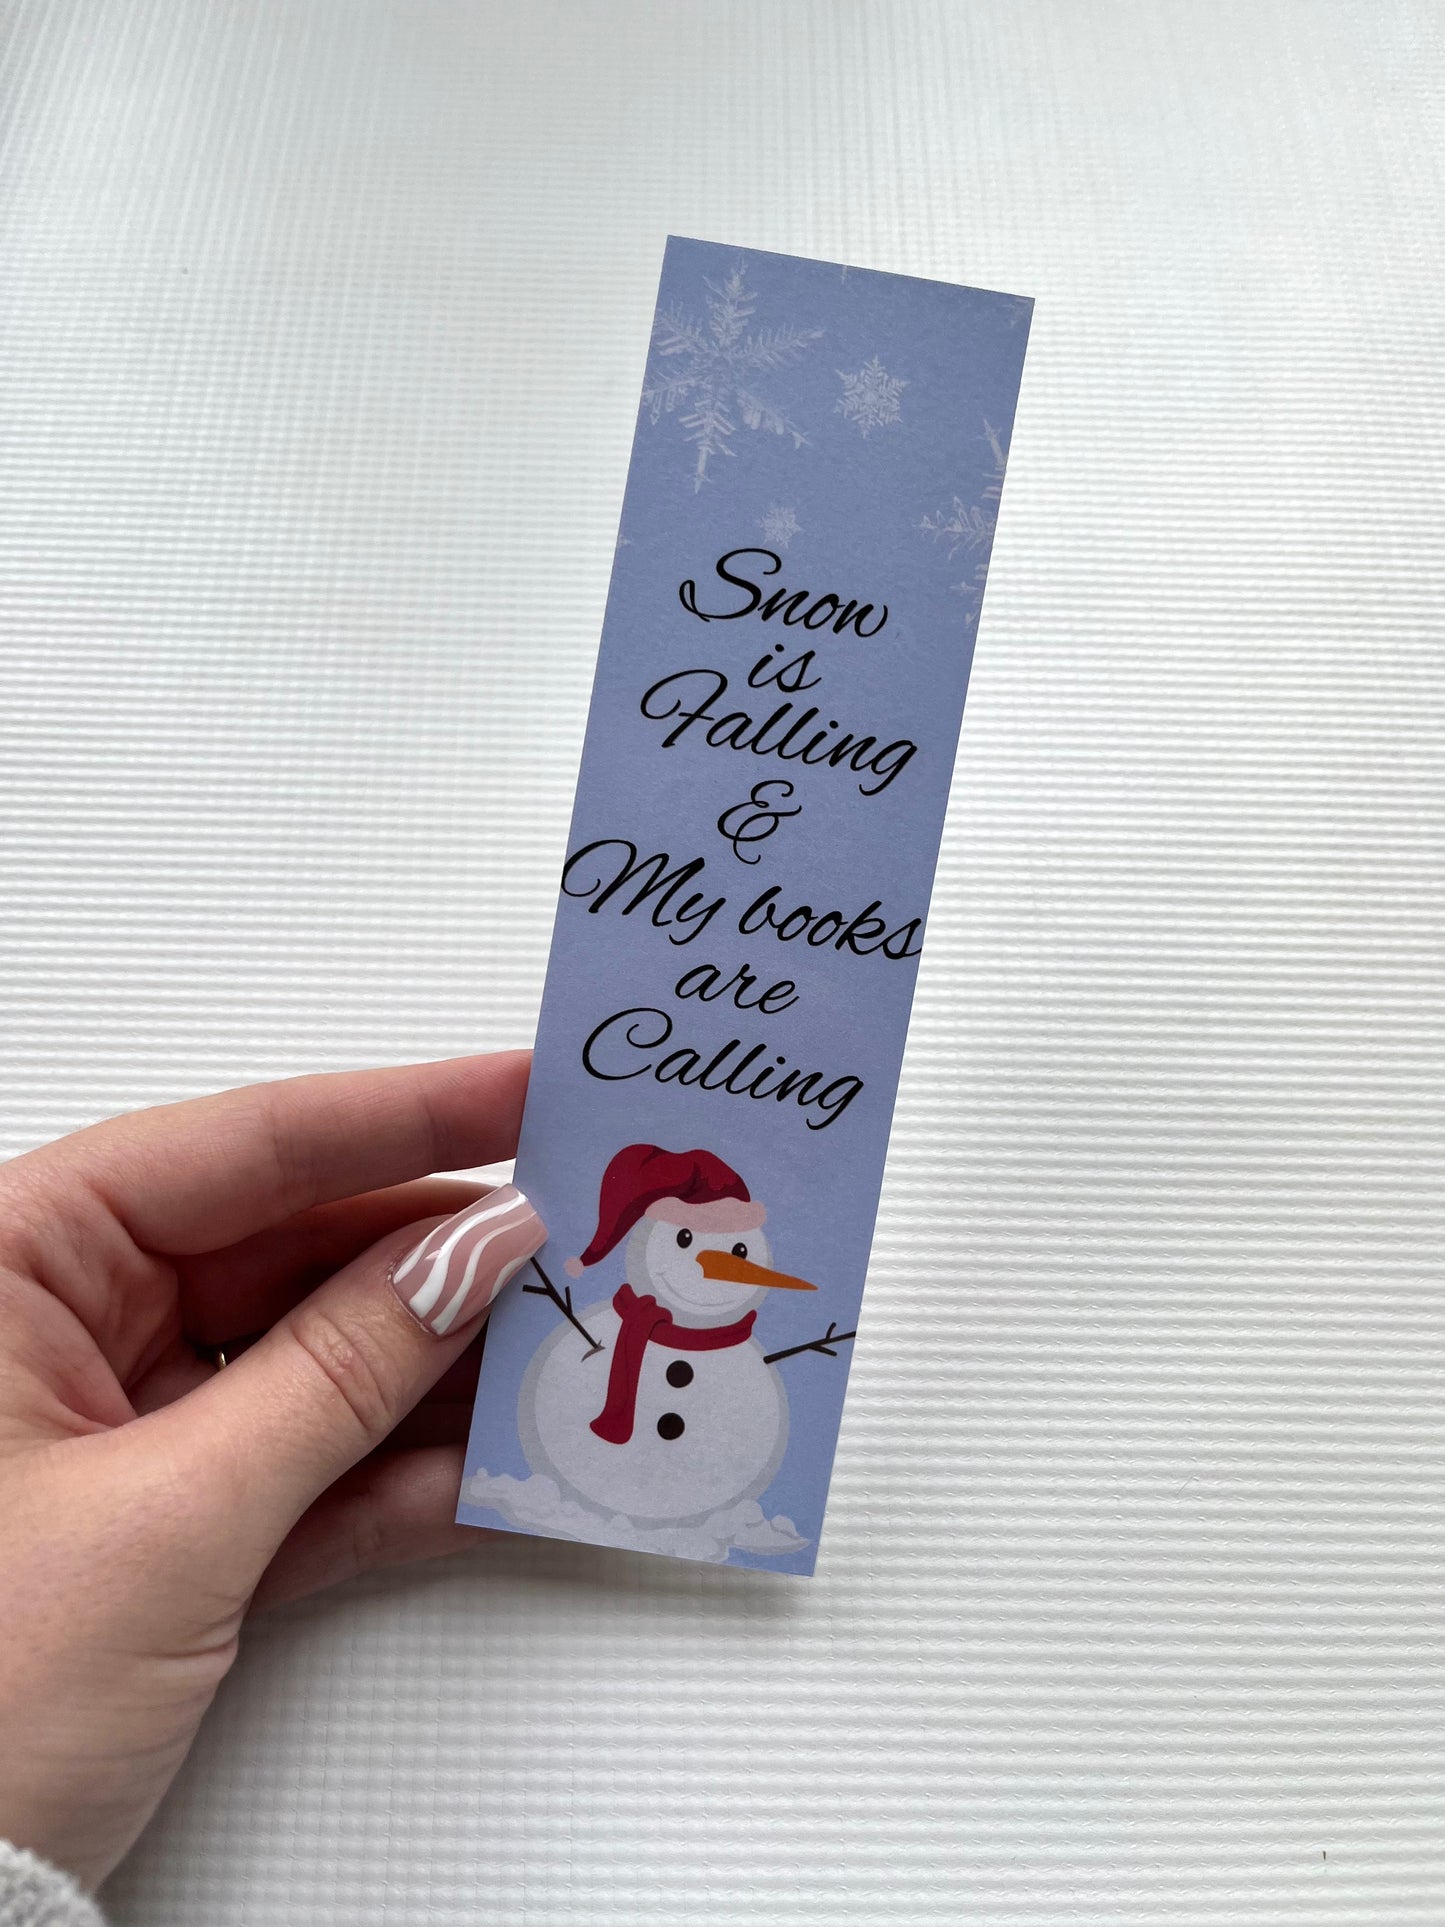 Snow is falling & my books are calling Christmas bookmark